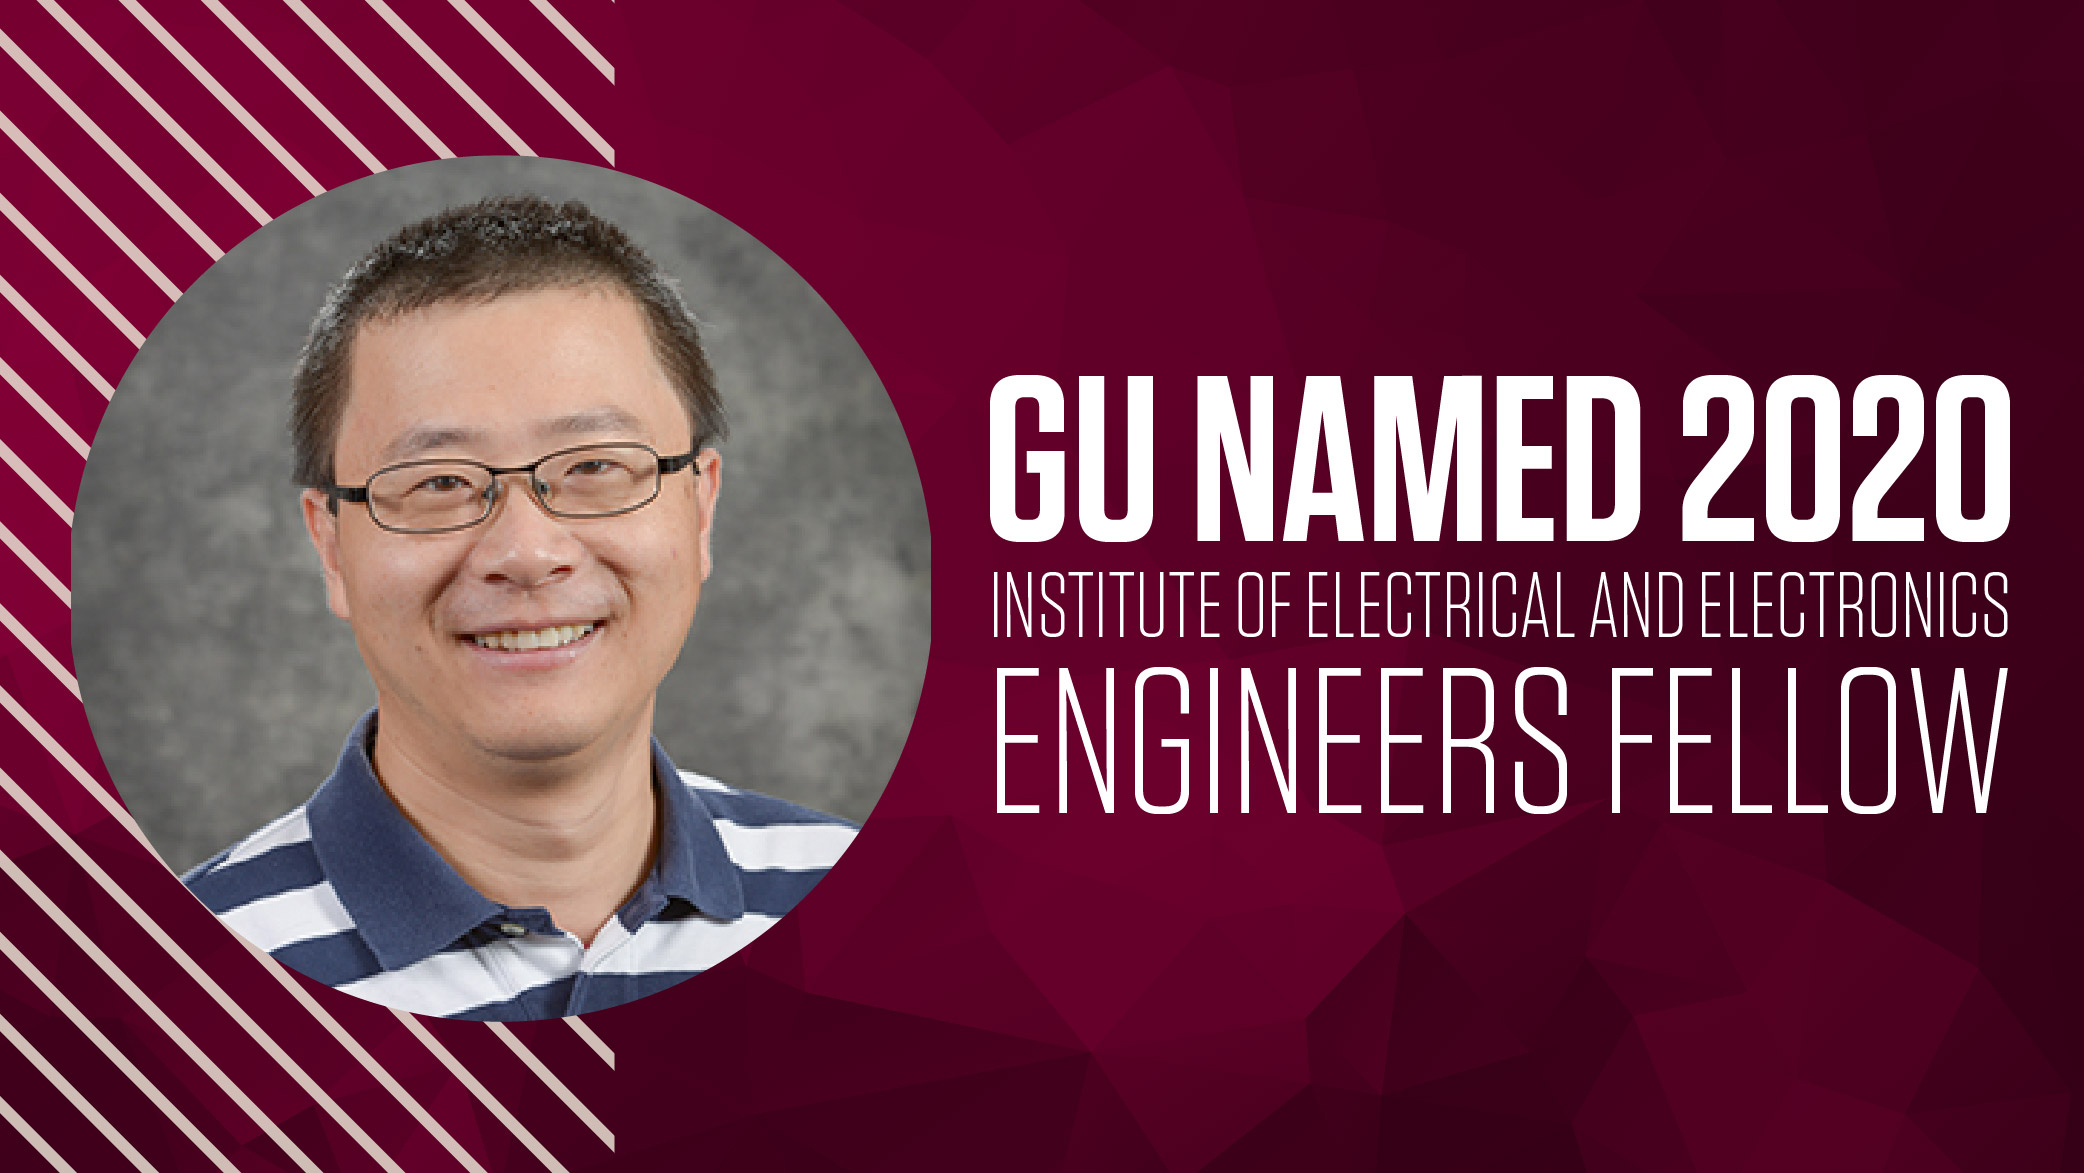 Dr. Guofei Gu. Text on right side: "Gu named Institute of Electrical and Electronics Engineers Fellow".